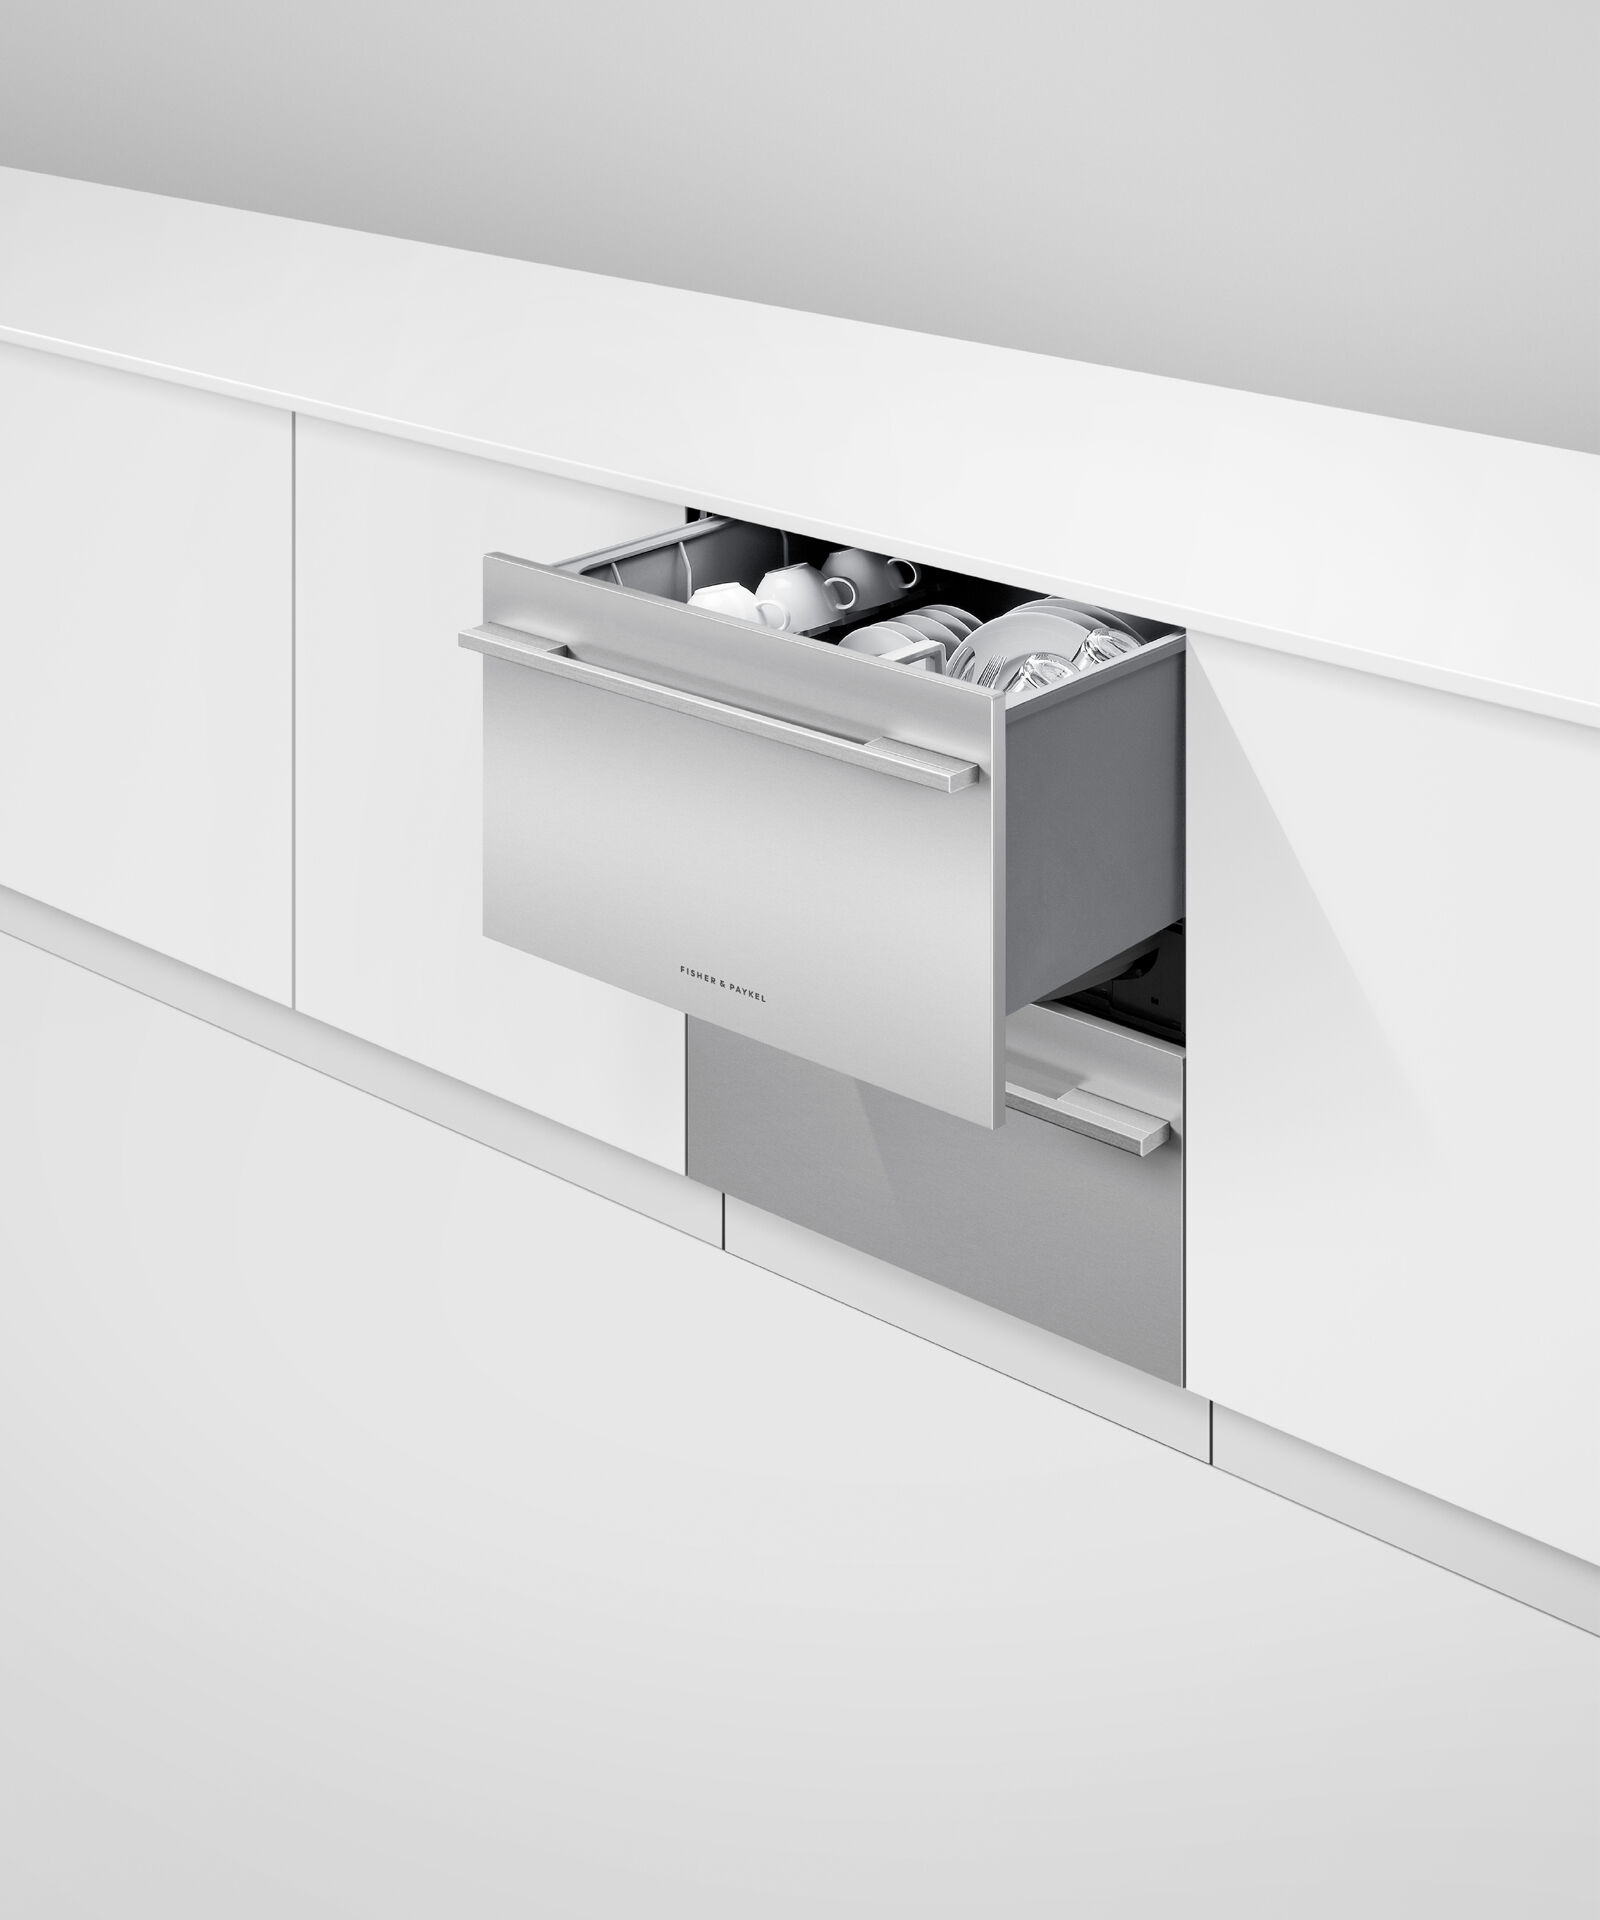 Integrated Double DishDrawer™ Dishwasher gallery image 9.0